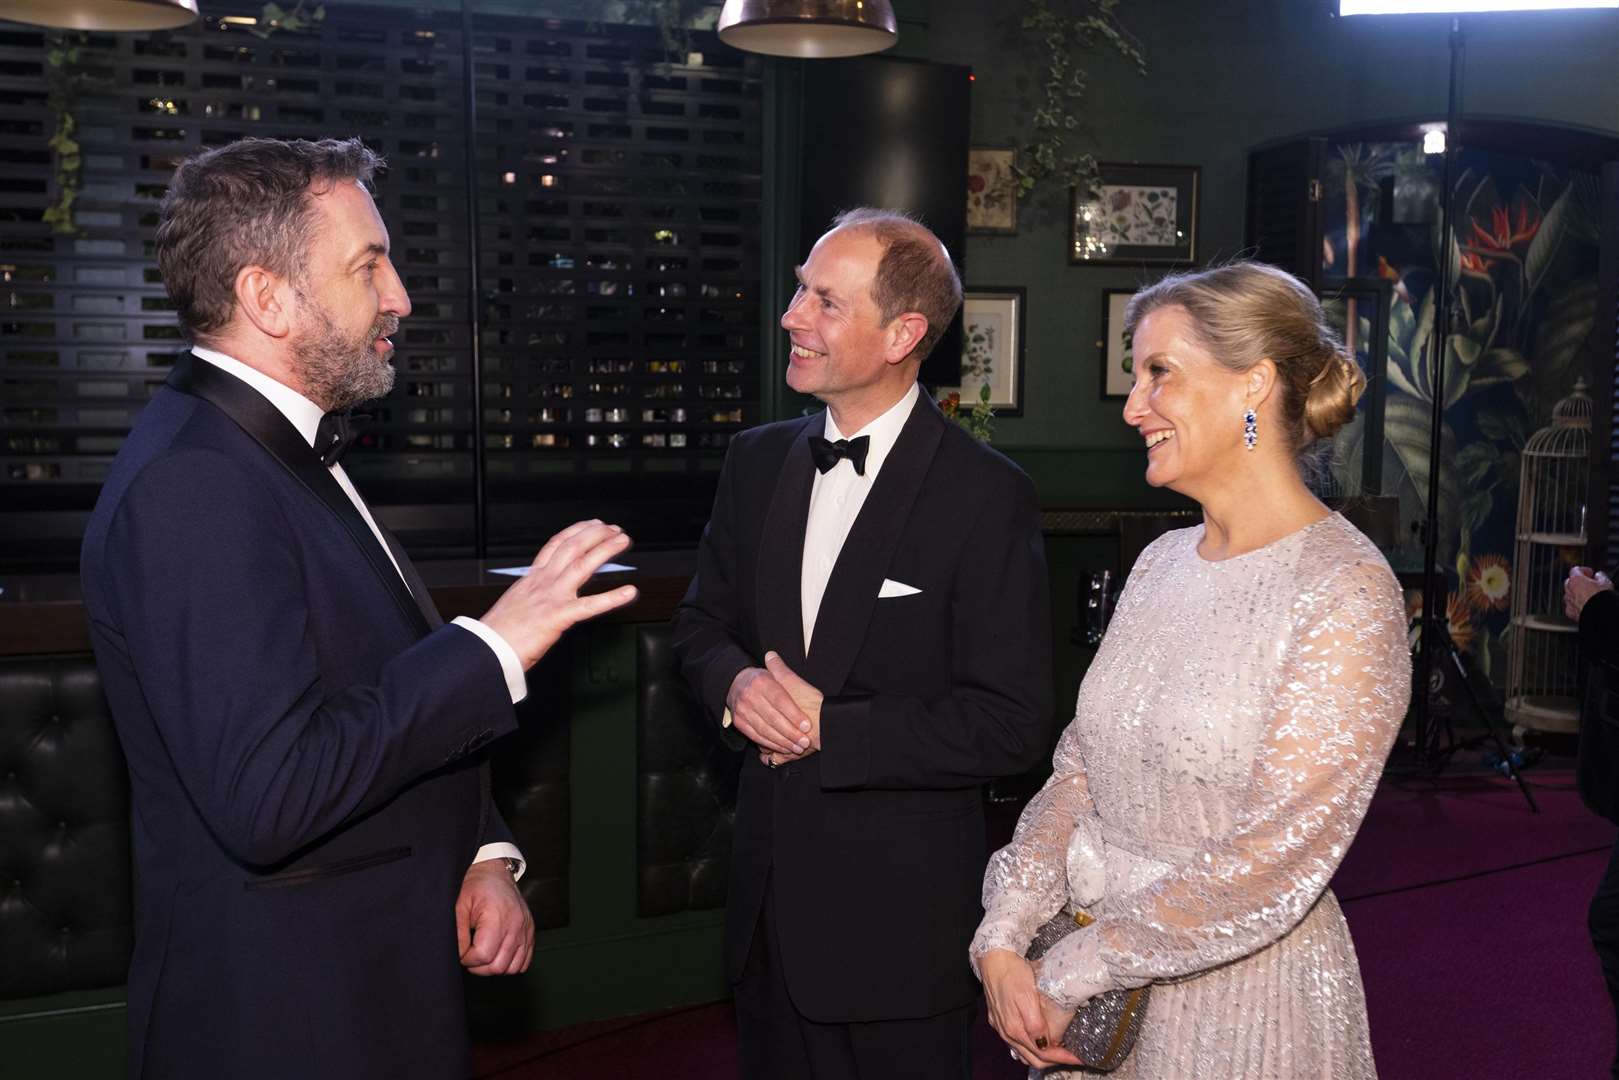 The Earl and Countess of Wessex meet Lee Mack (David Parry/PA)